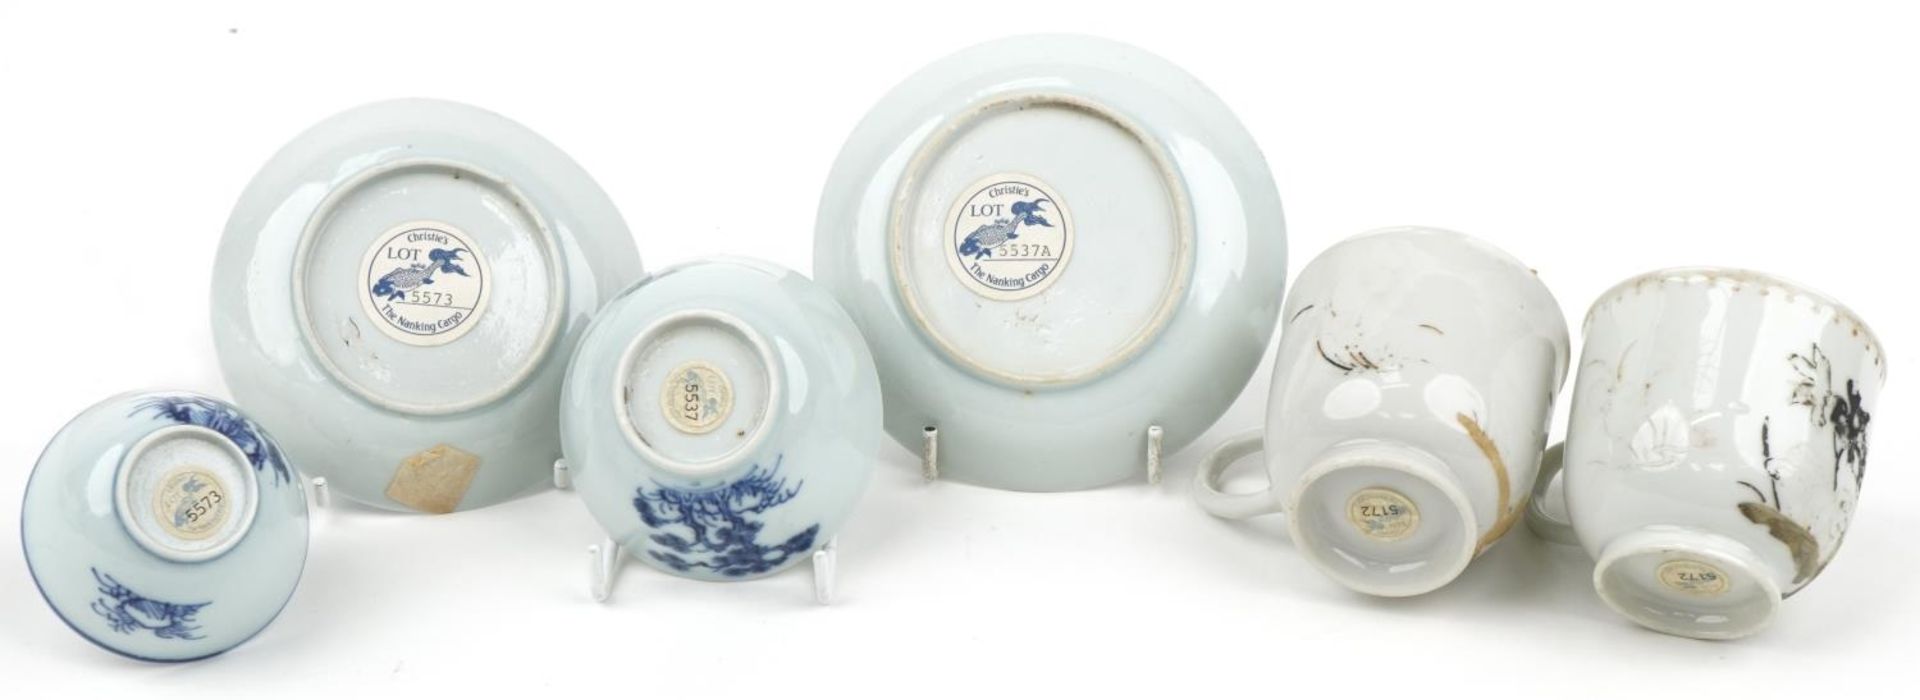 Chinese blue and white porcelain from the Nanking Cargo comprising two tea bowls with saucers and - Image 11 of 14